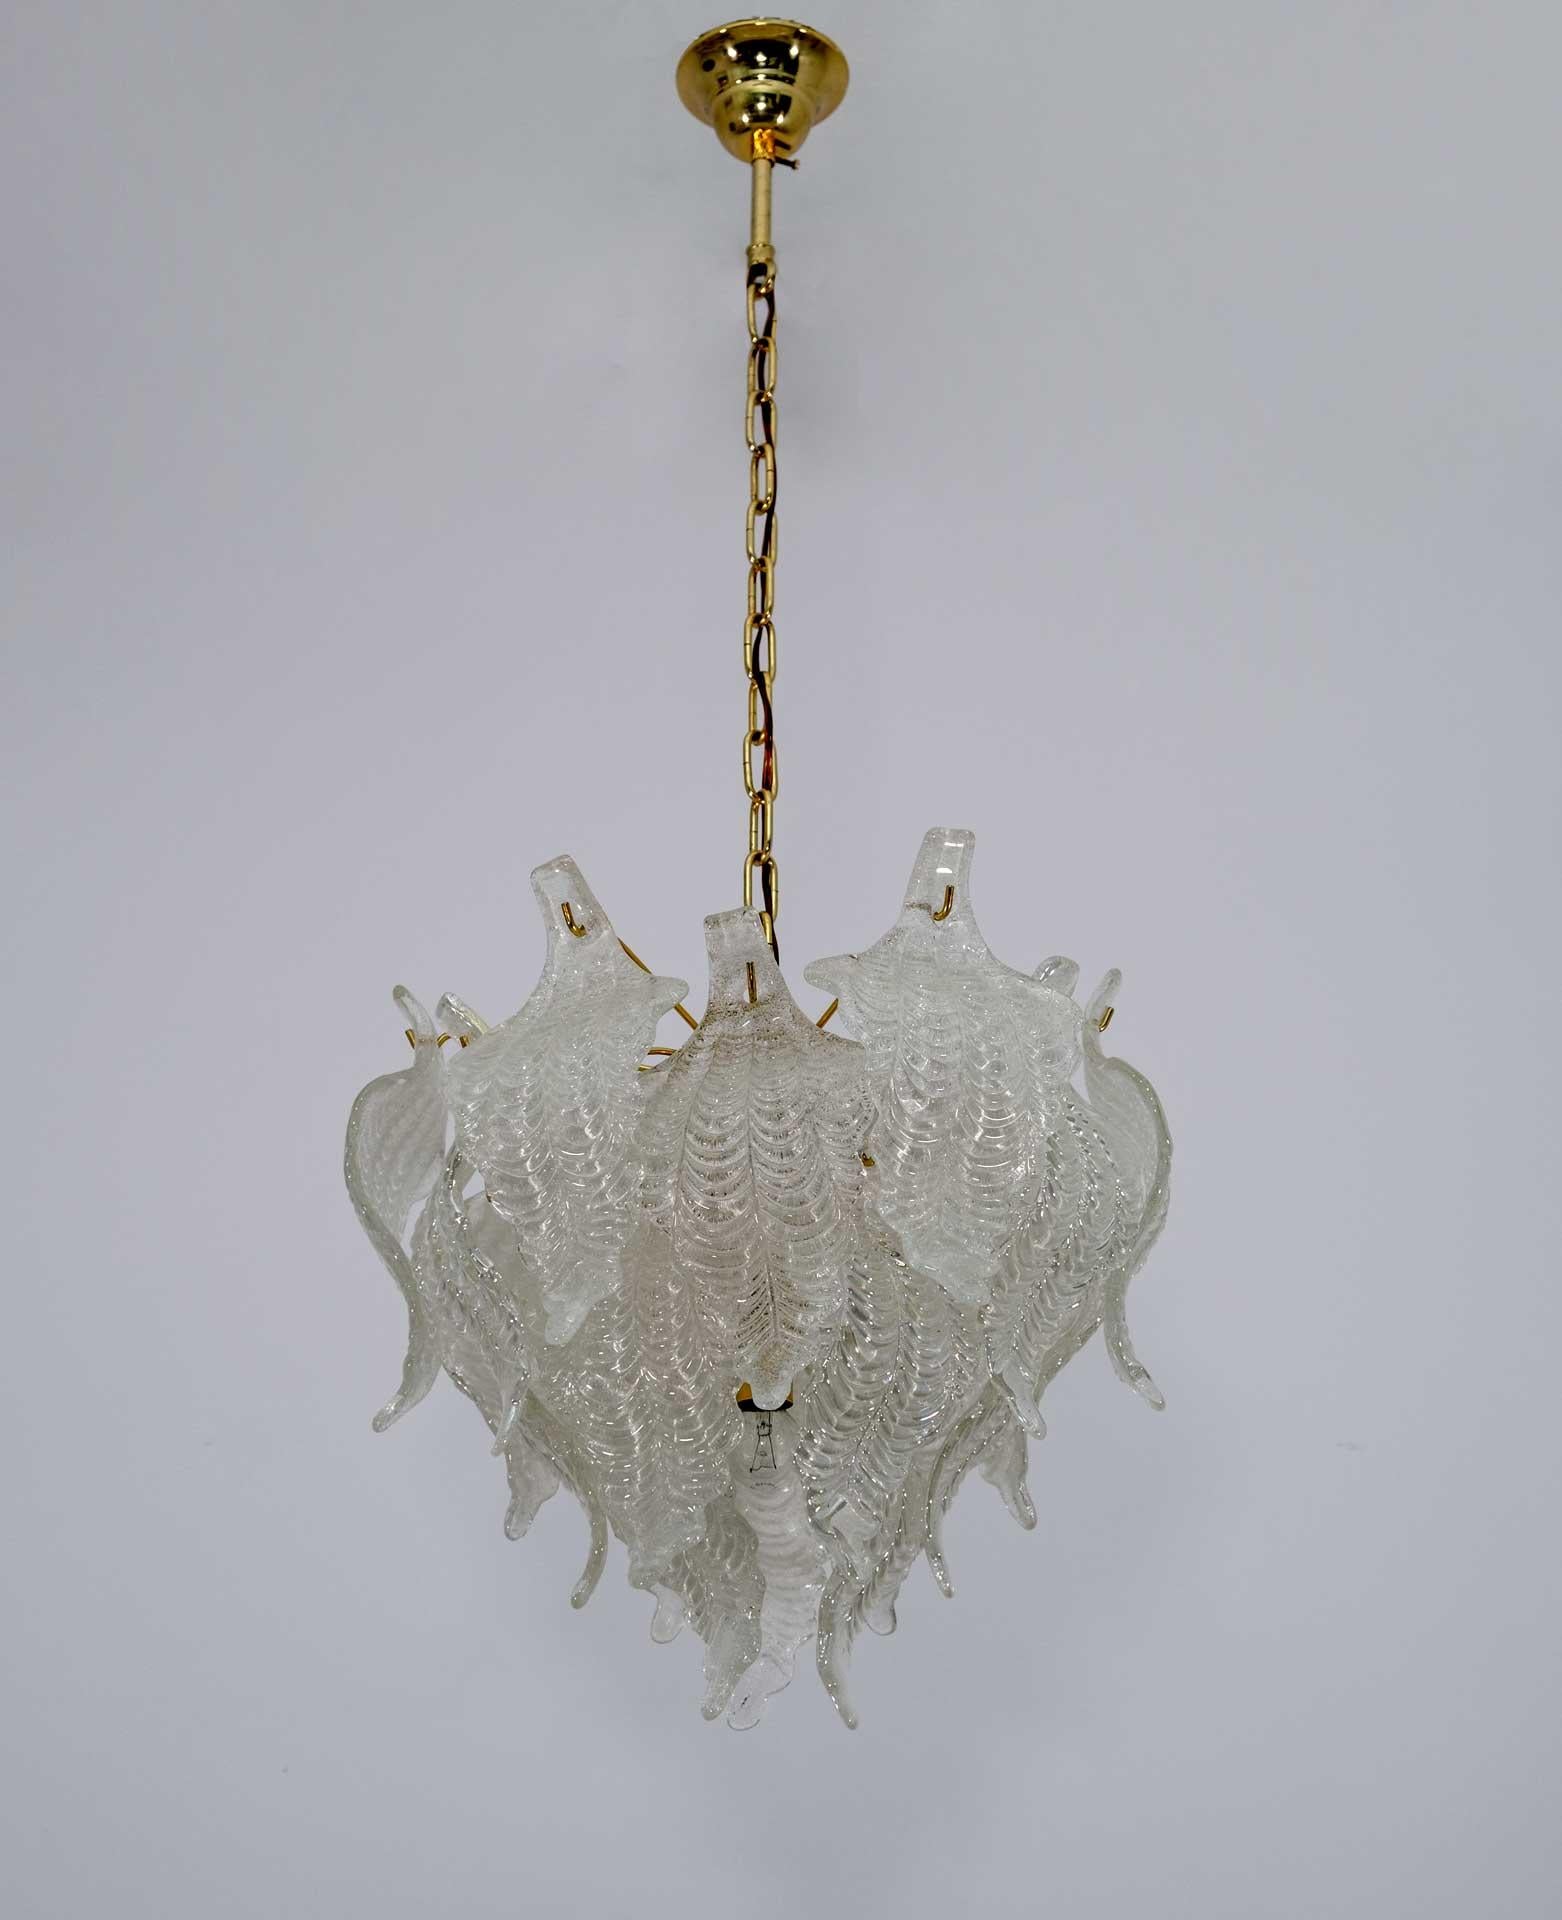 Exceptional Mazzega chandelier with Murano glass leaves with golden brass structure, 4 lights. The design and the quality of the glass make this piece the best of Italian design.